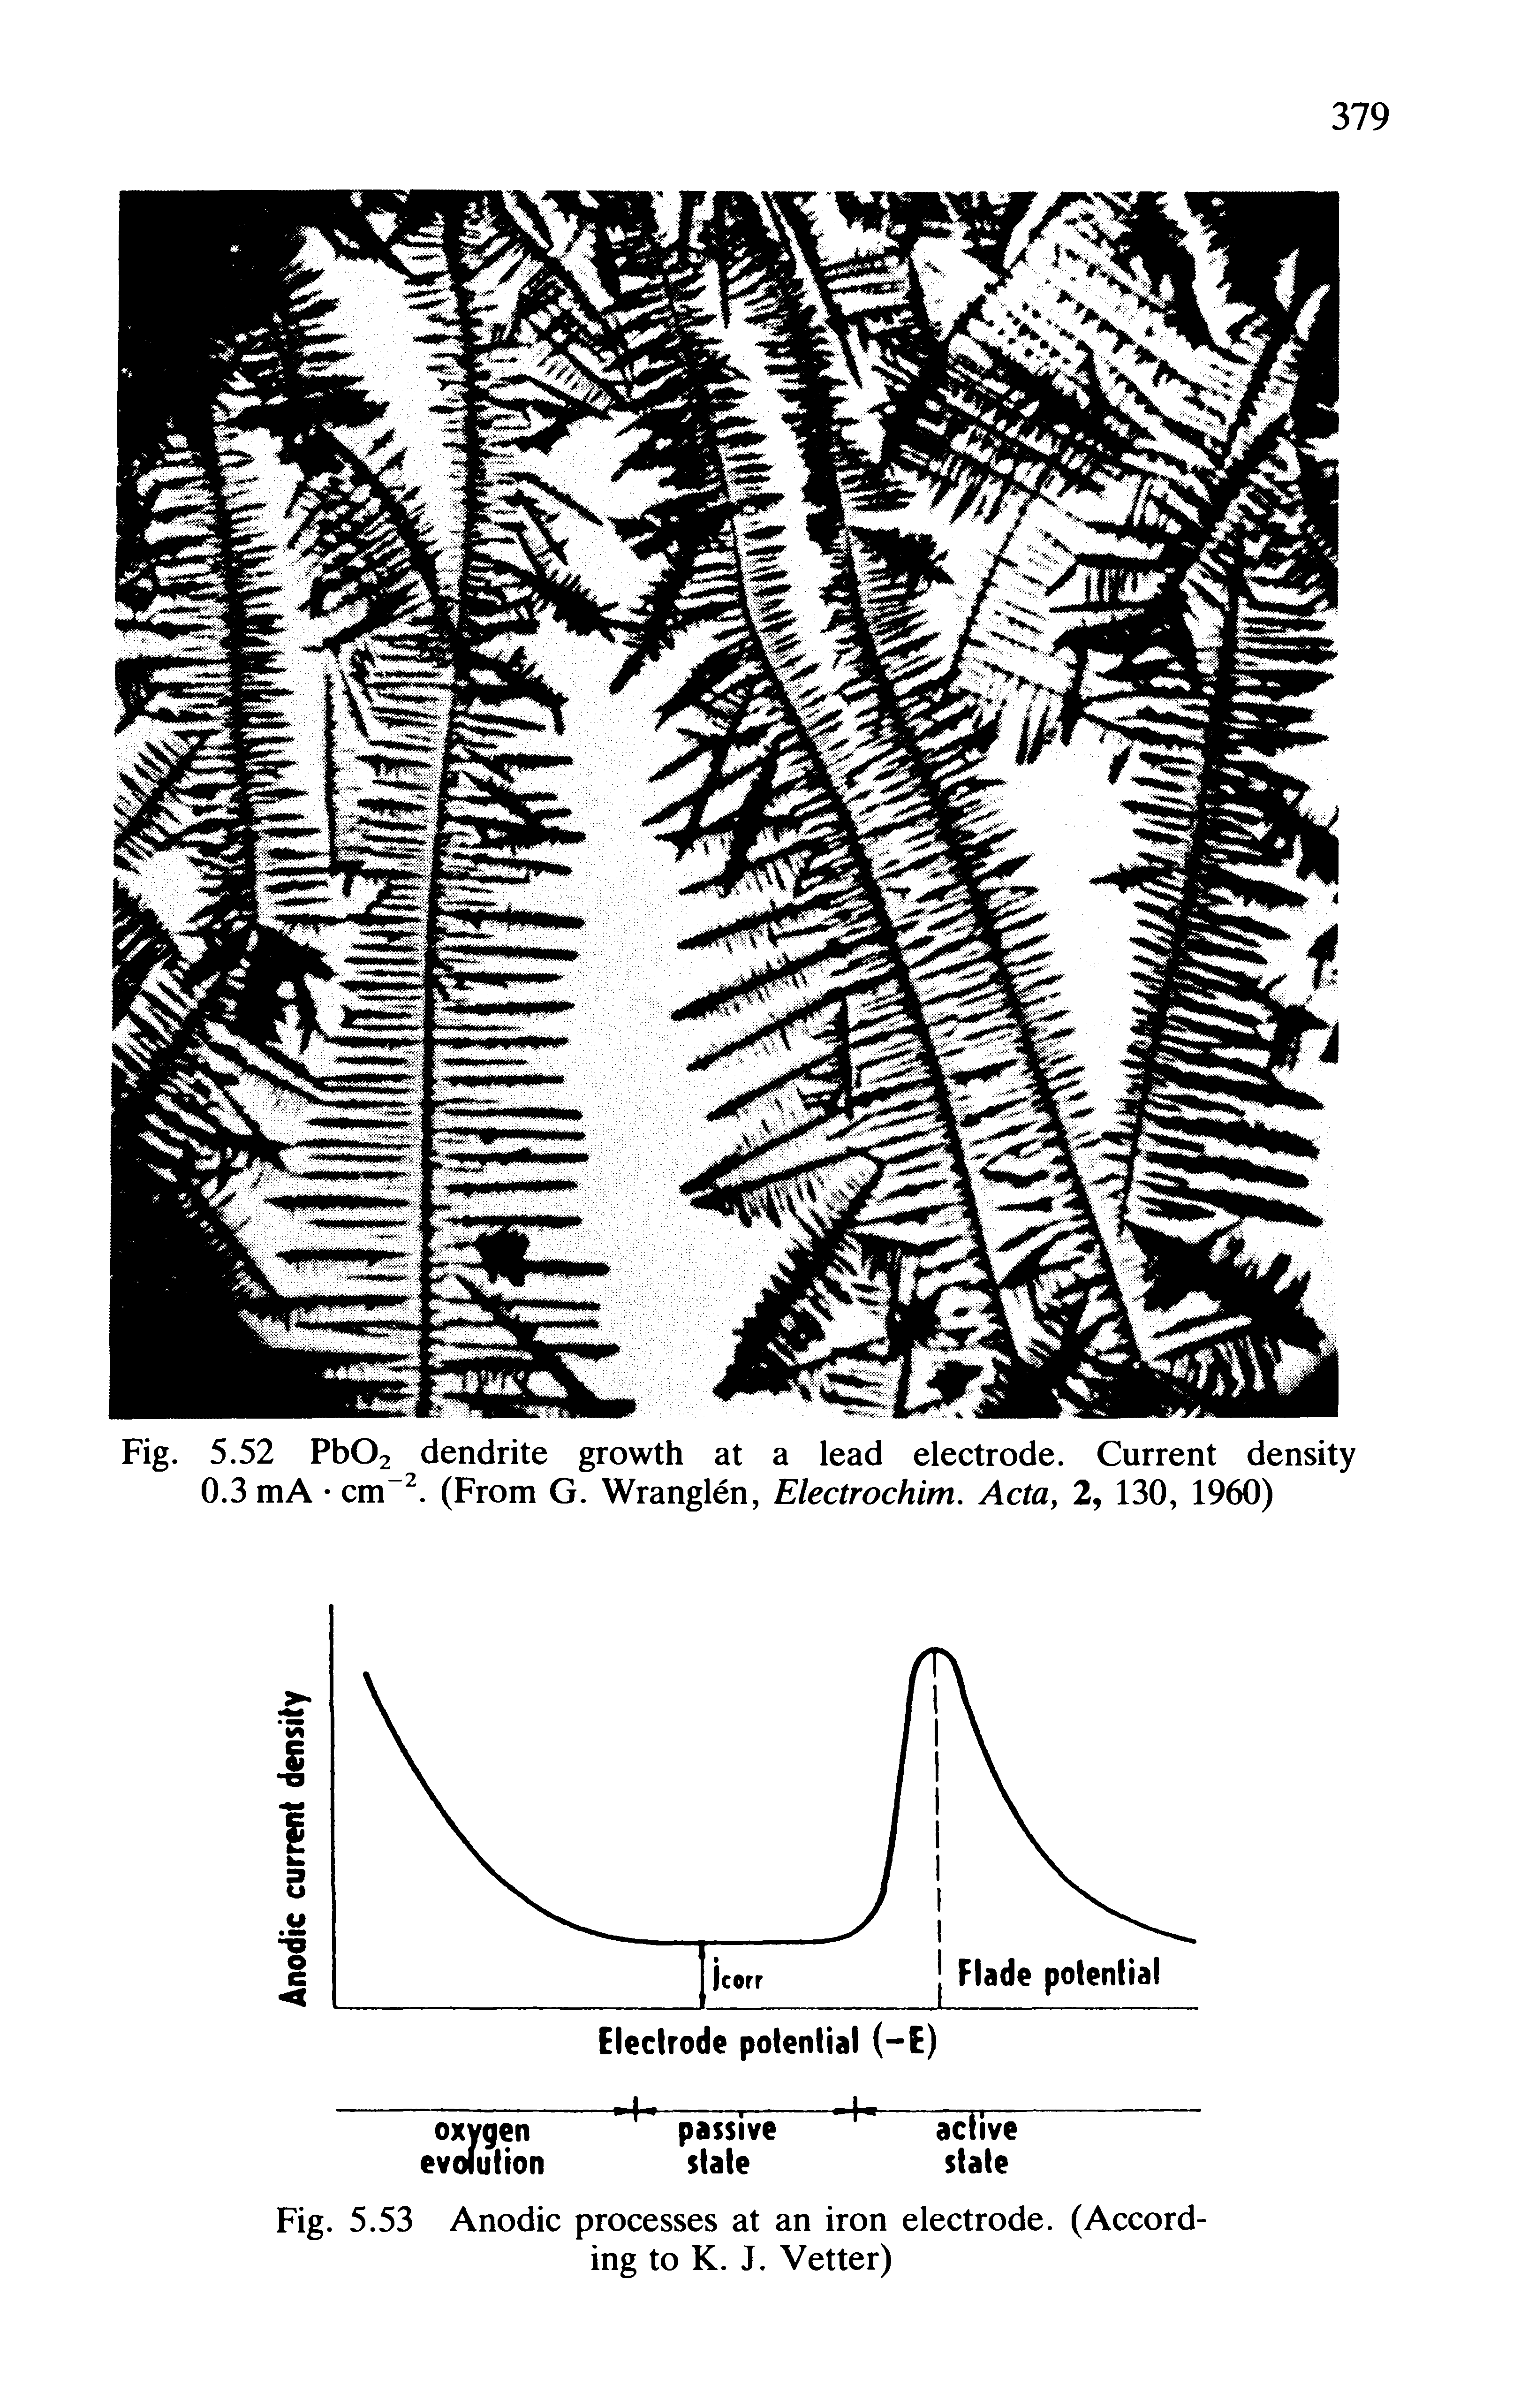 Fig. 5.53 Anodic processes at an iron electrode. (According to K. J. Vetter)...